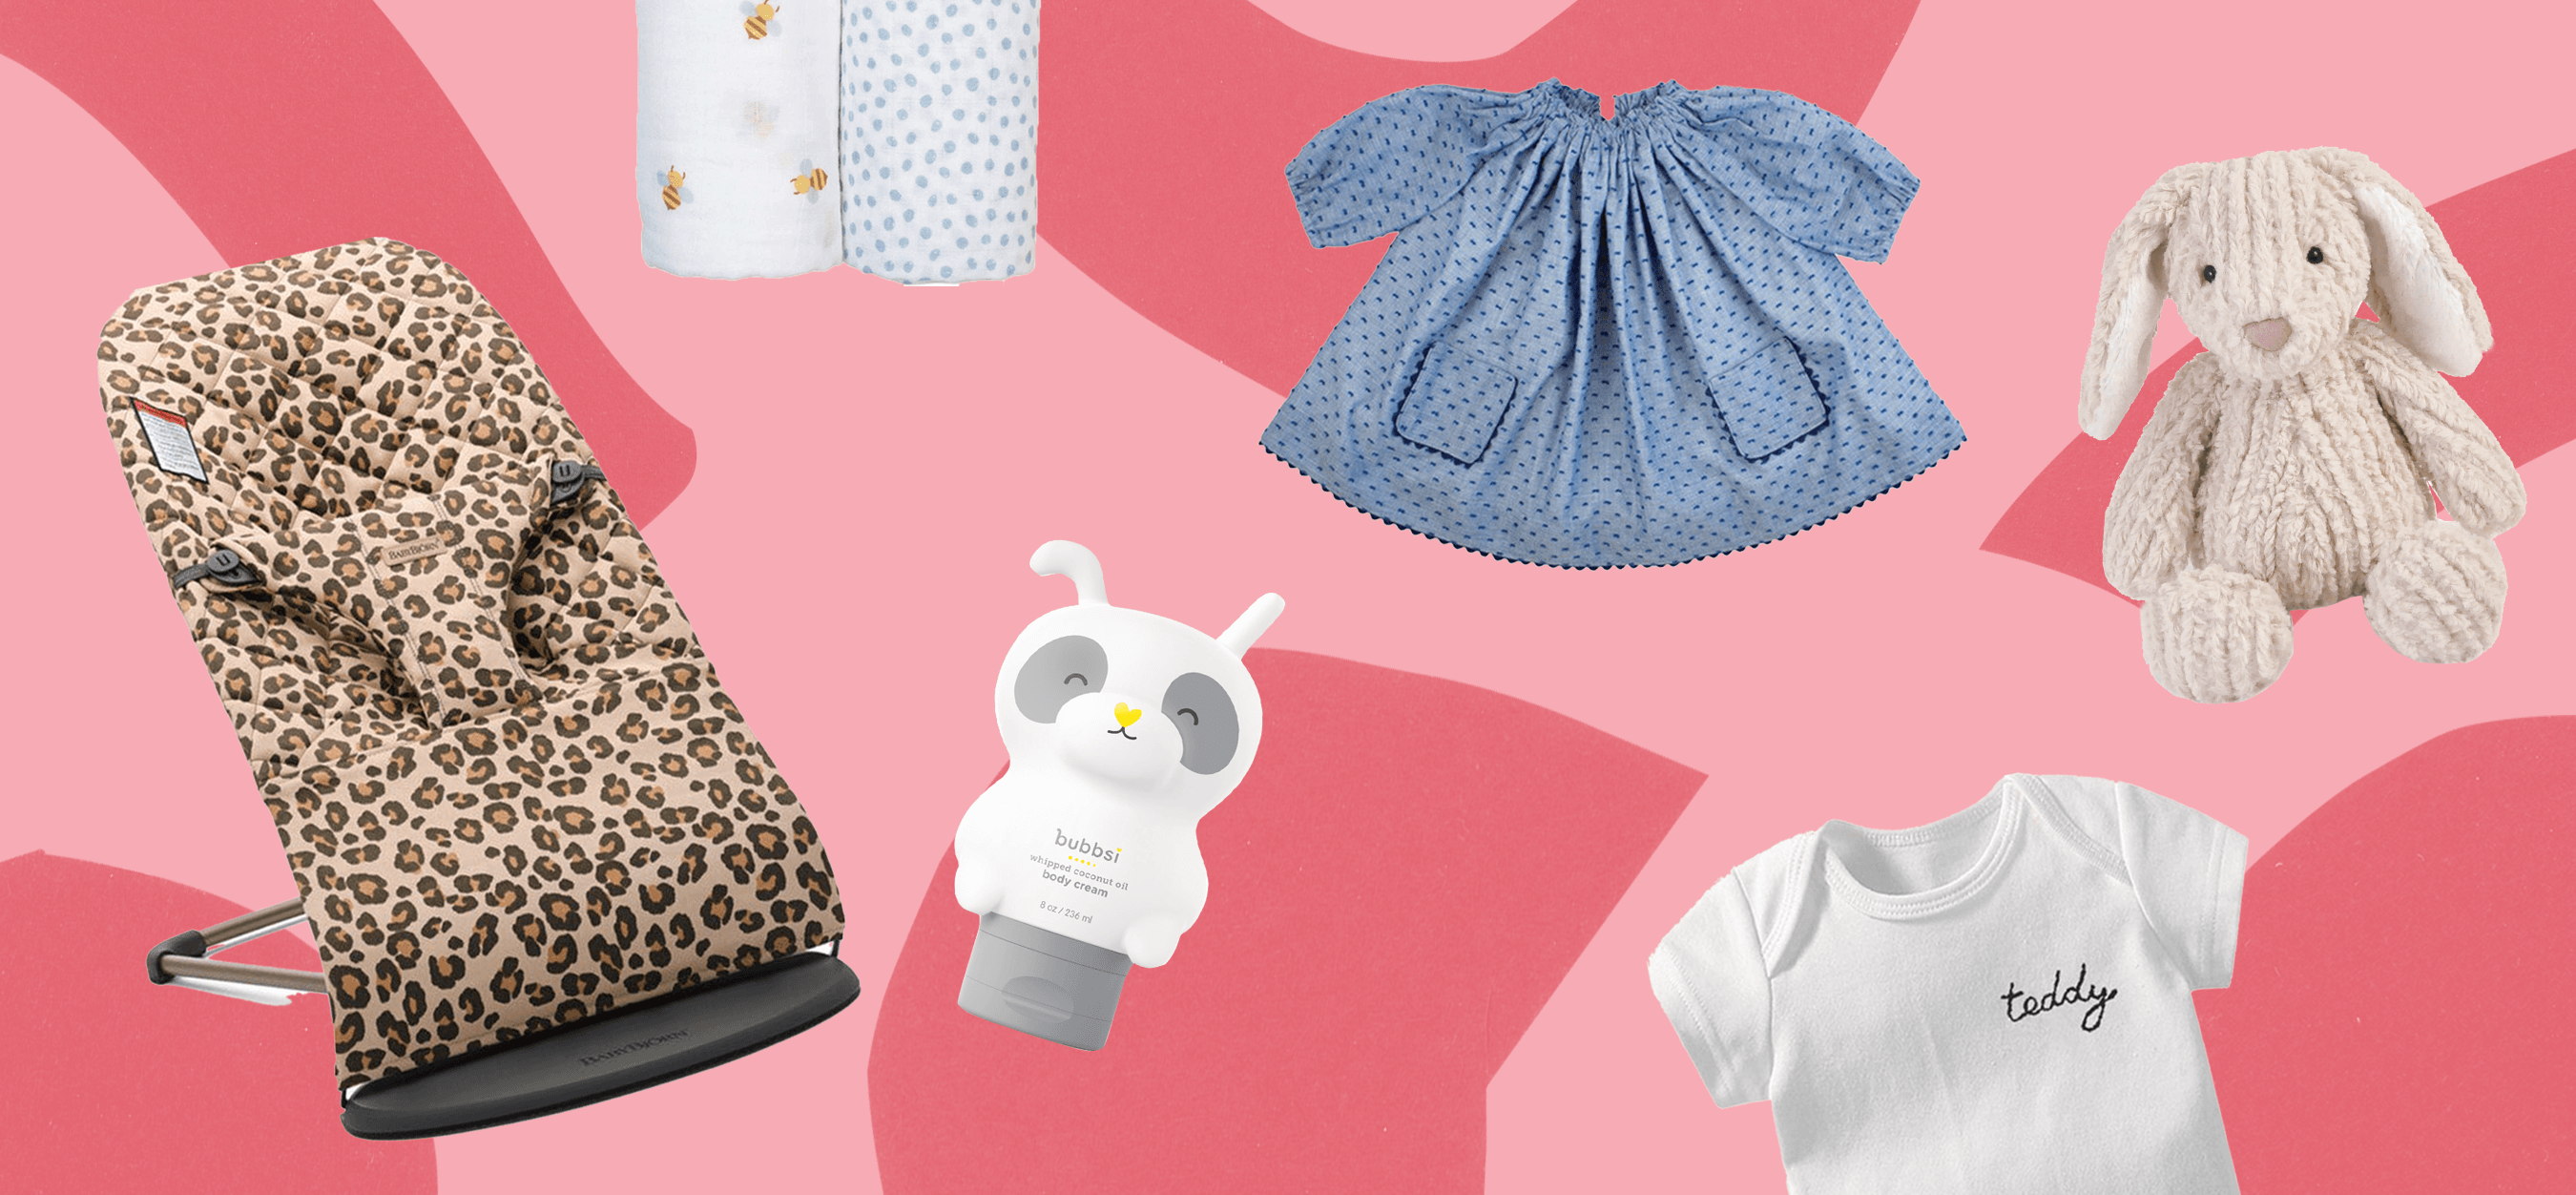 assortment of gifts for newborns like onesies and blankets